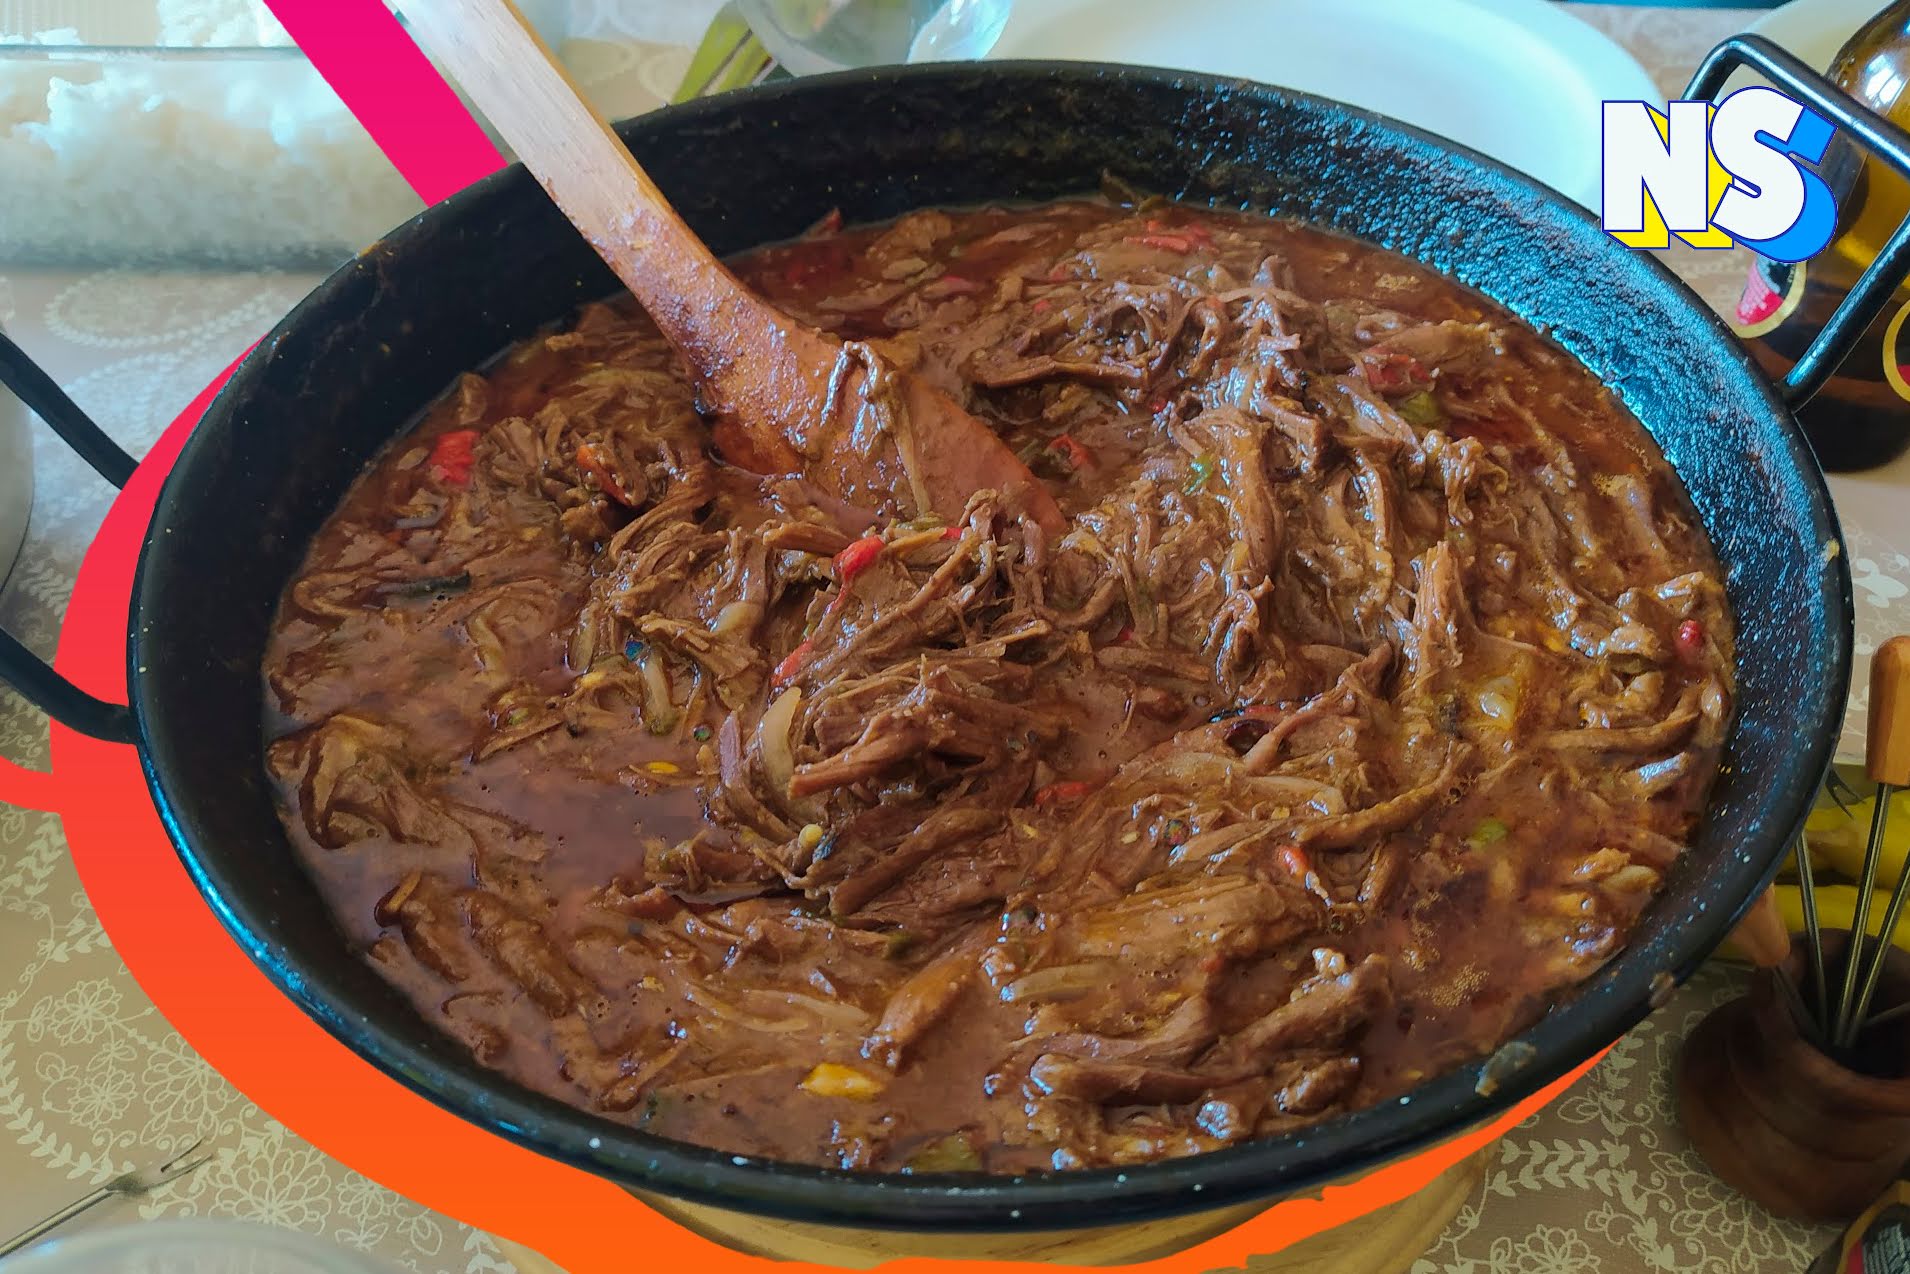 Get Into This Cuban Delicacy: Stewed ‘Old Clothes’ Popularly Known As ‘Ropa Vieja’